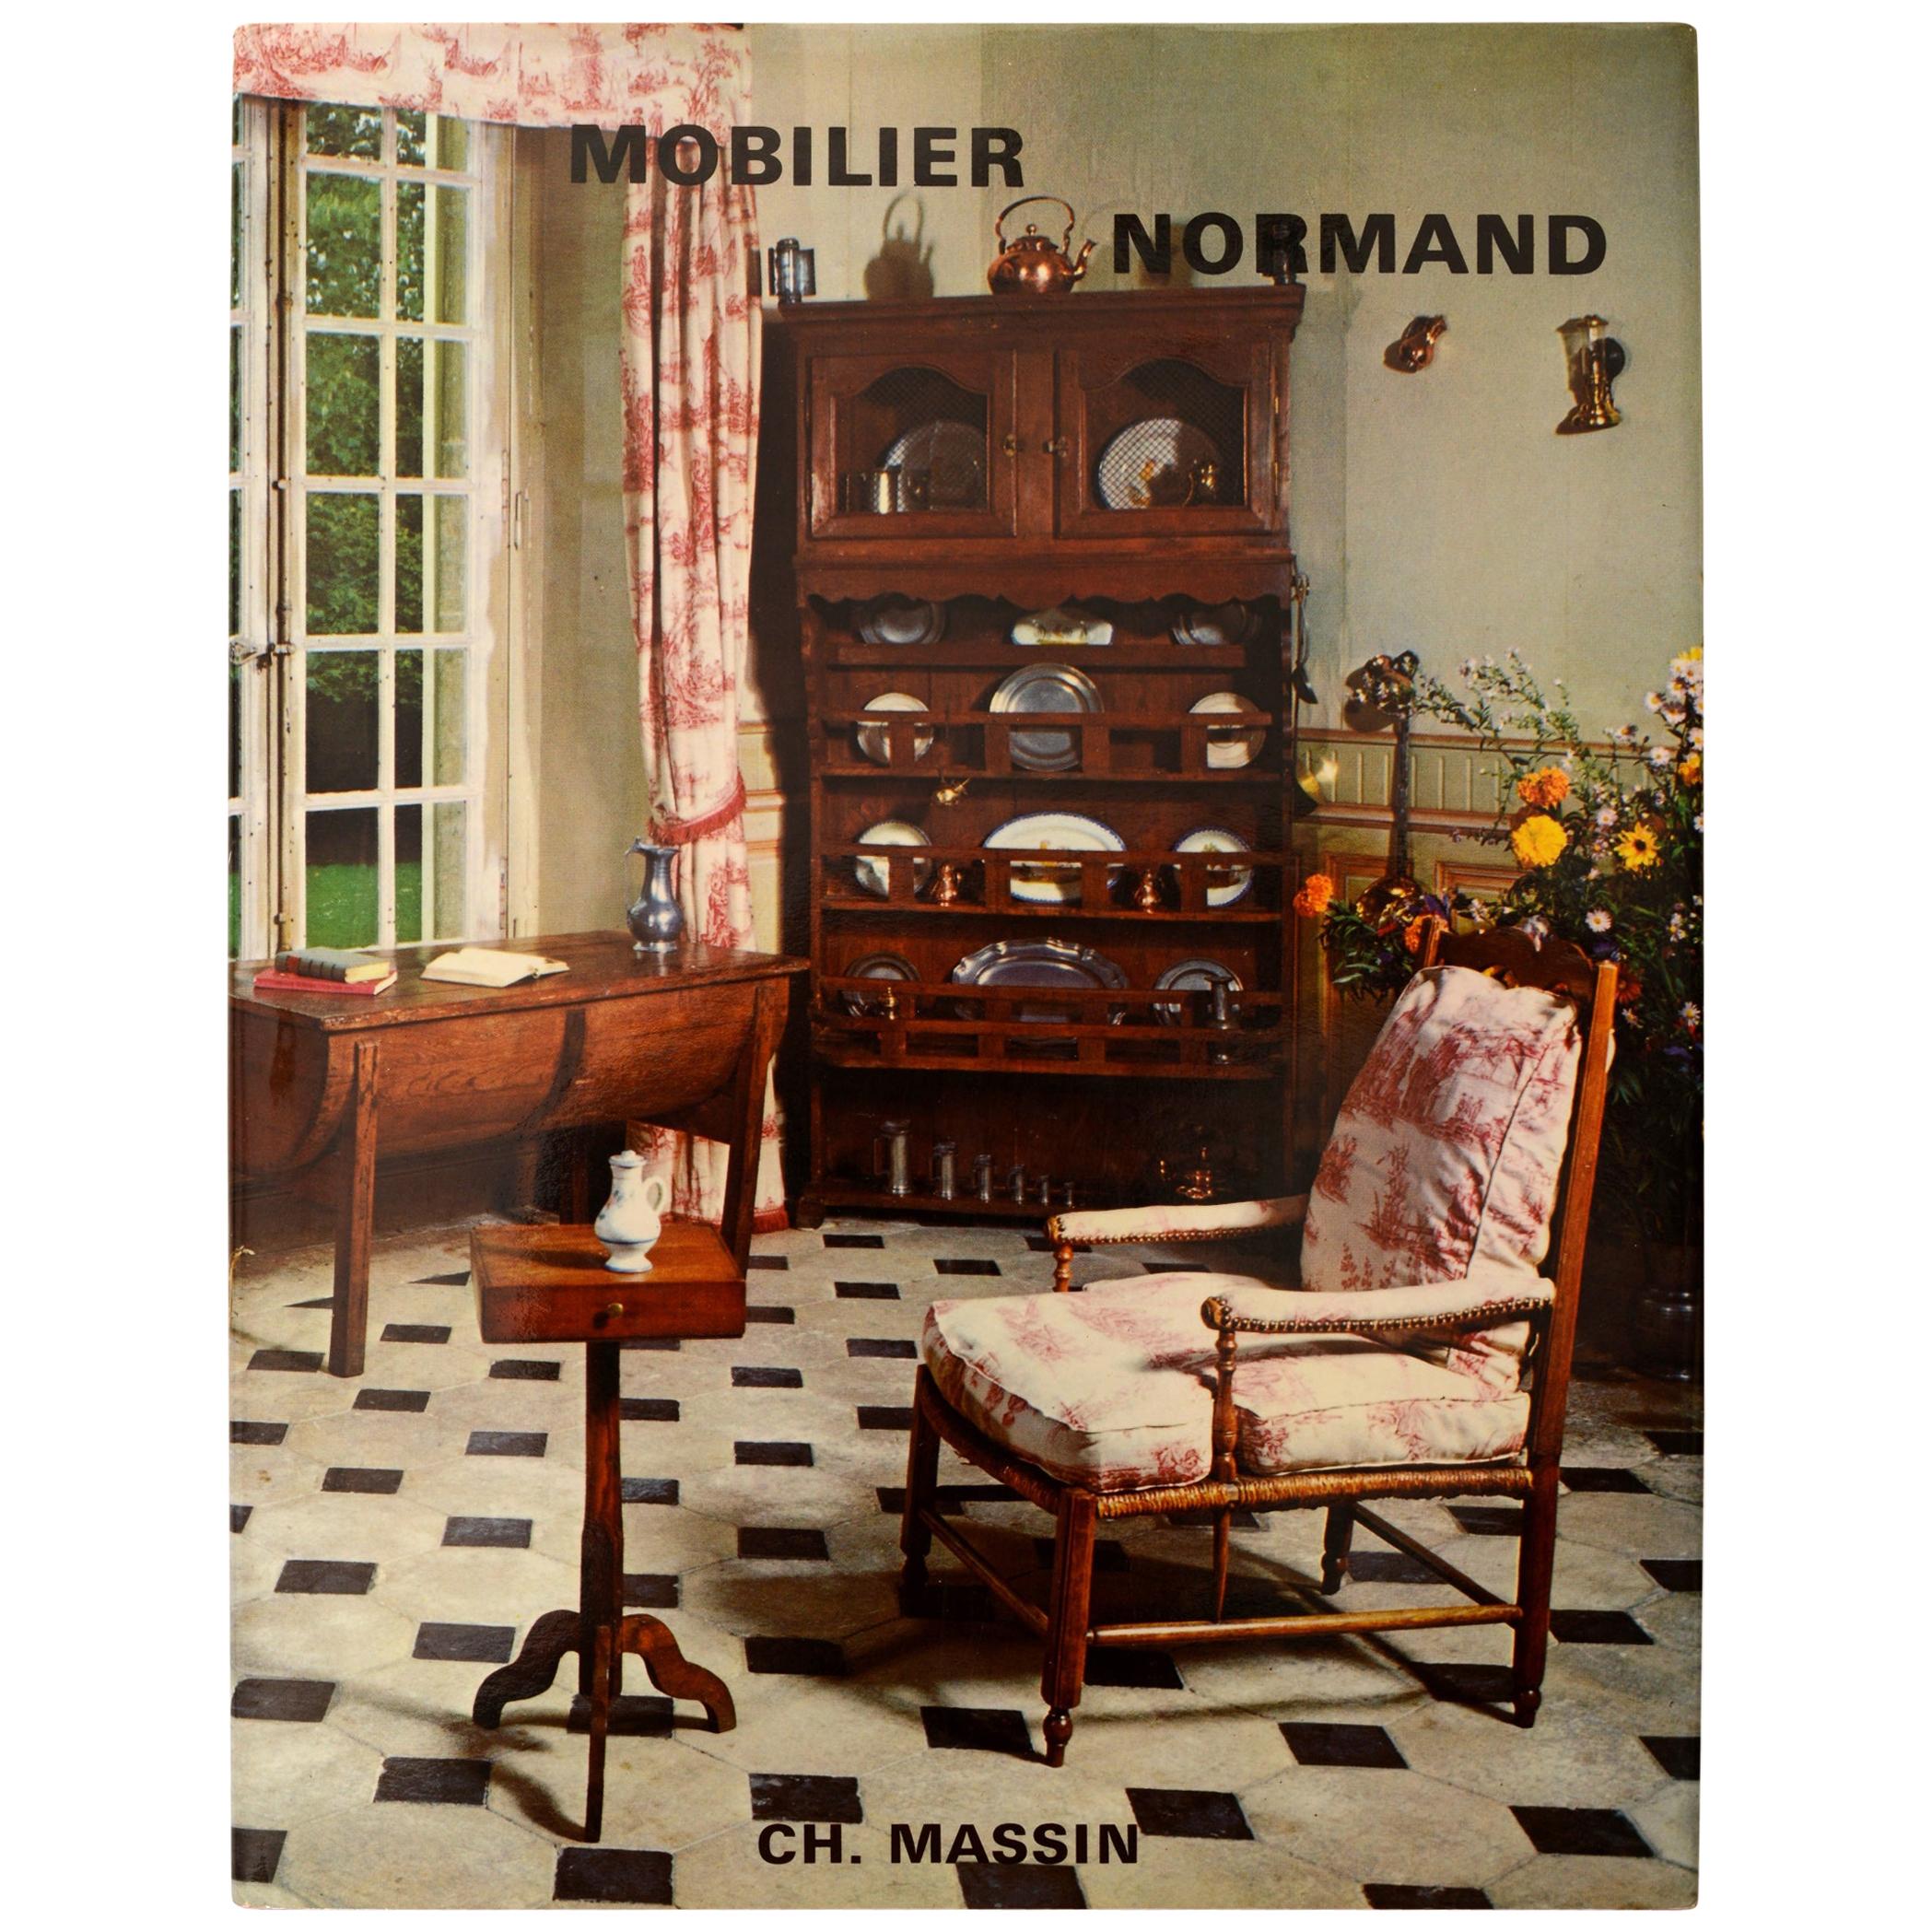 Mobilier Normand by Lucile Olivier, First Edition